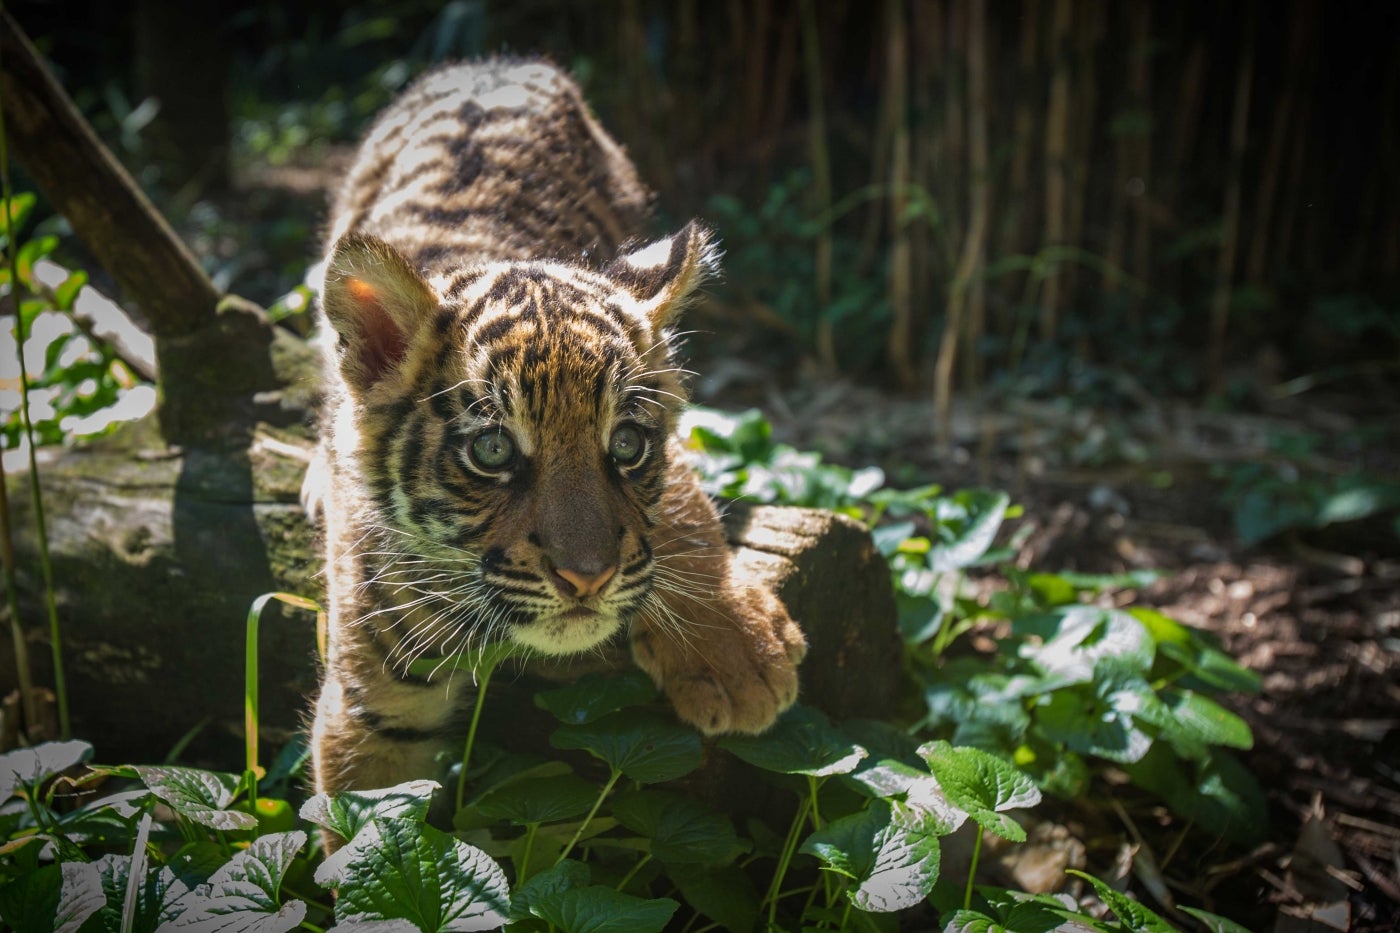 A 9-week-old male tiger cub with striped fur, big paws and long whiskers climbs over a leaf-covered log.